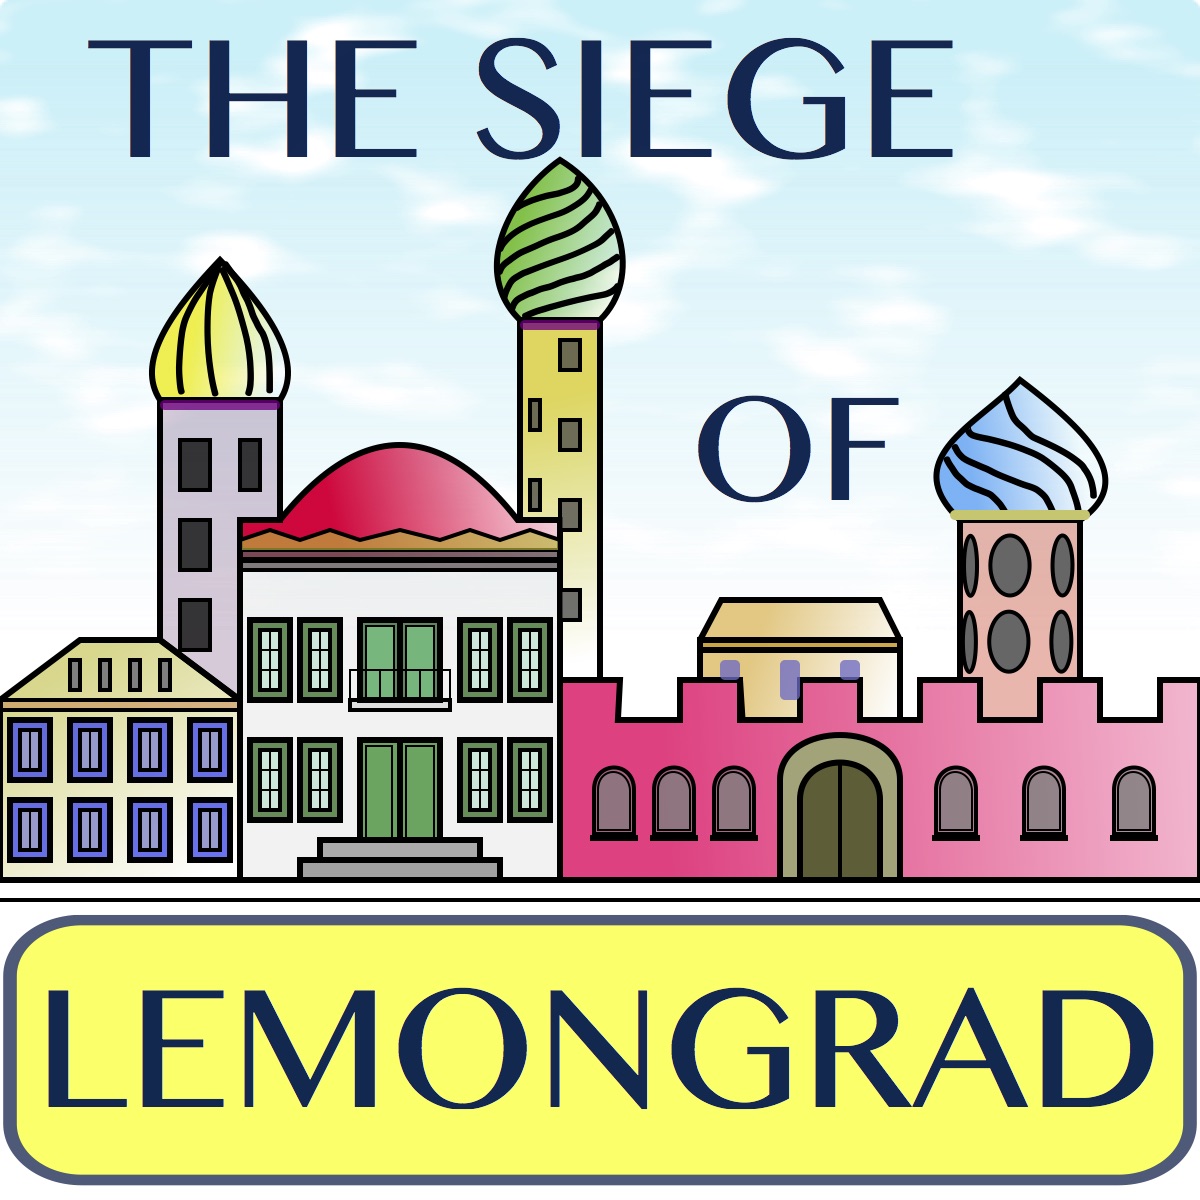 YouTube video of the composition The Siege of Lemongrad by Frans Absil